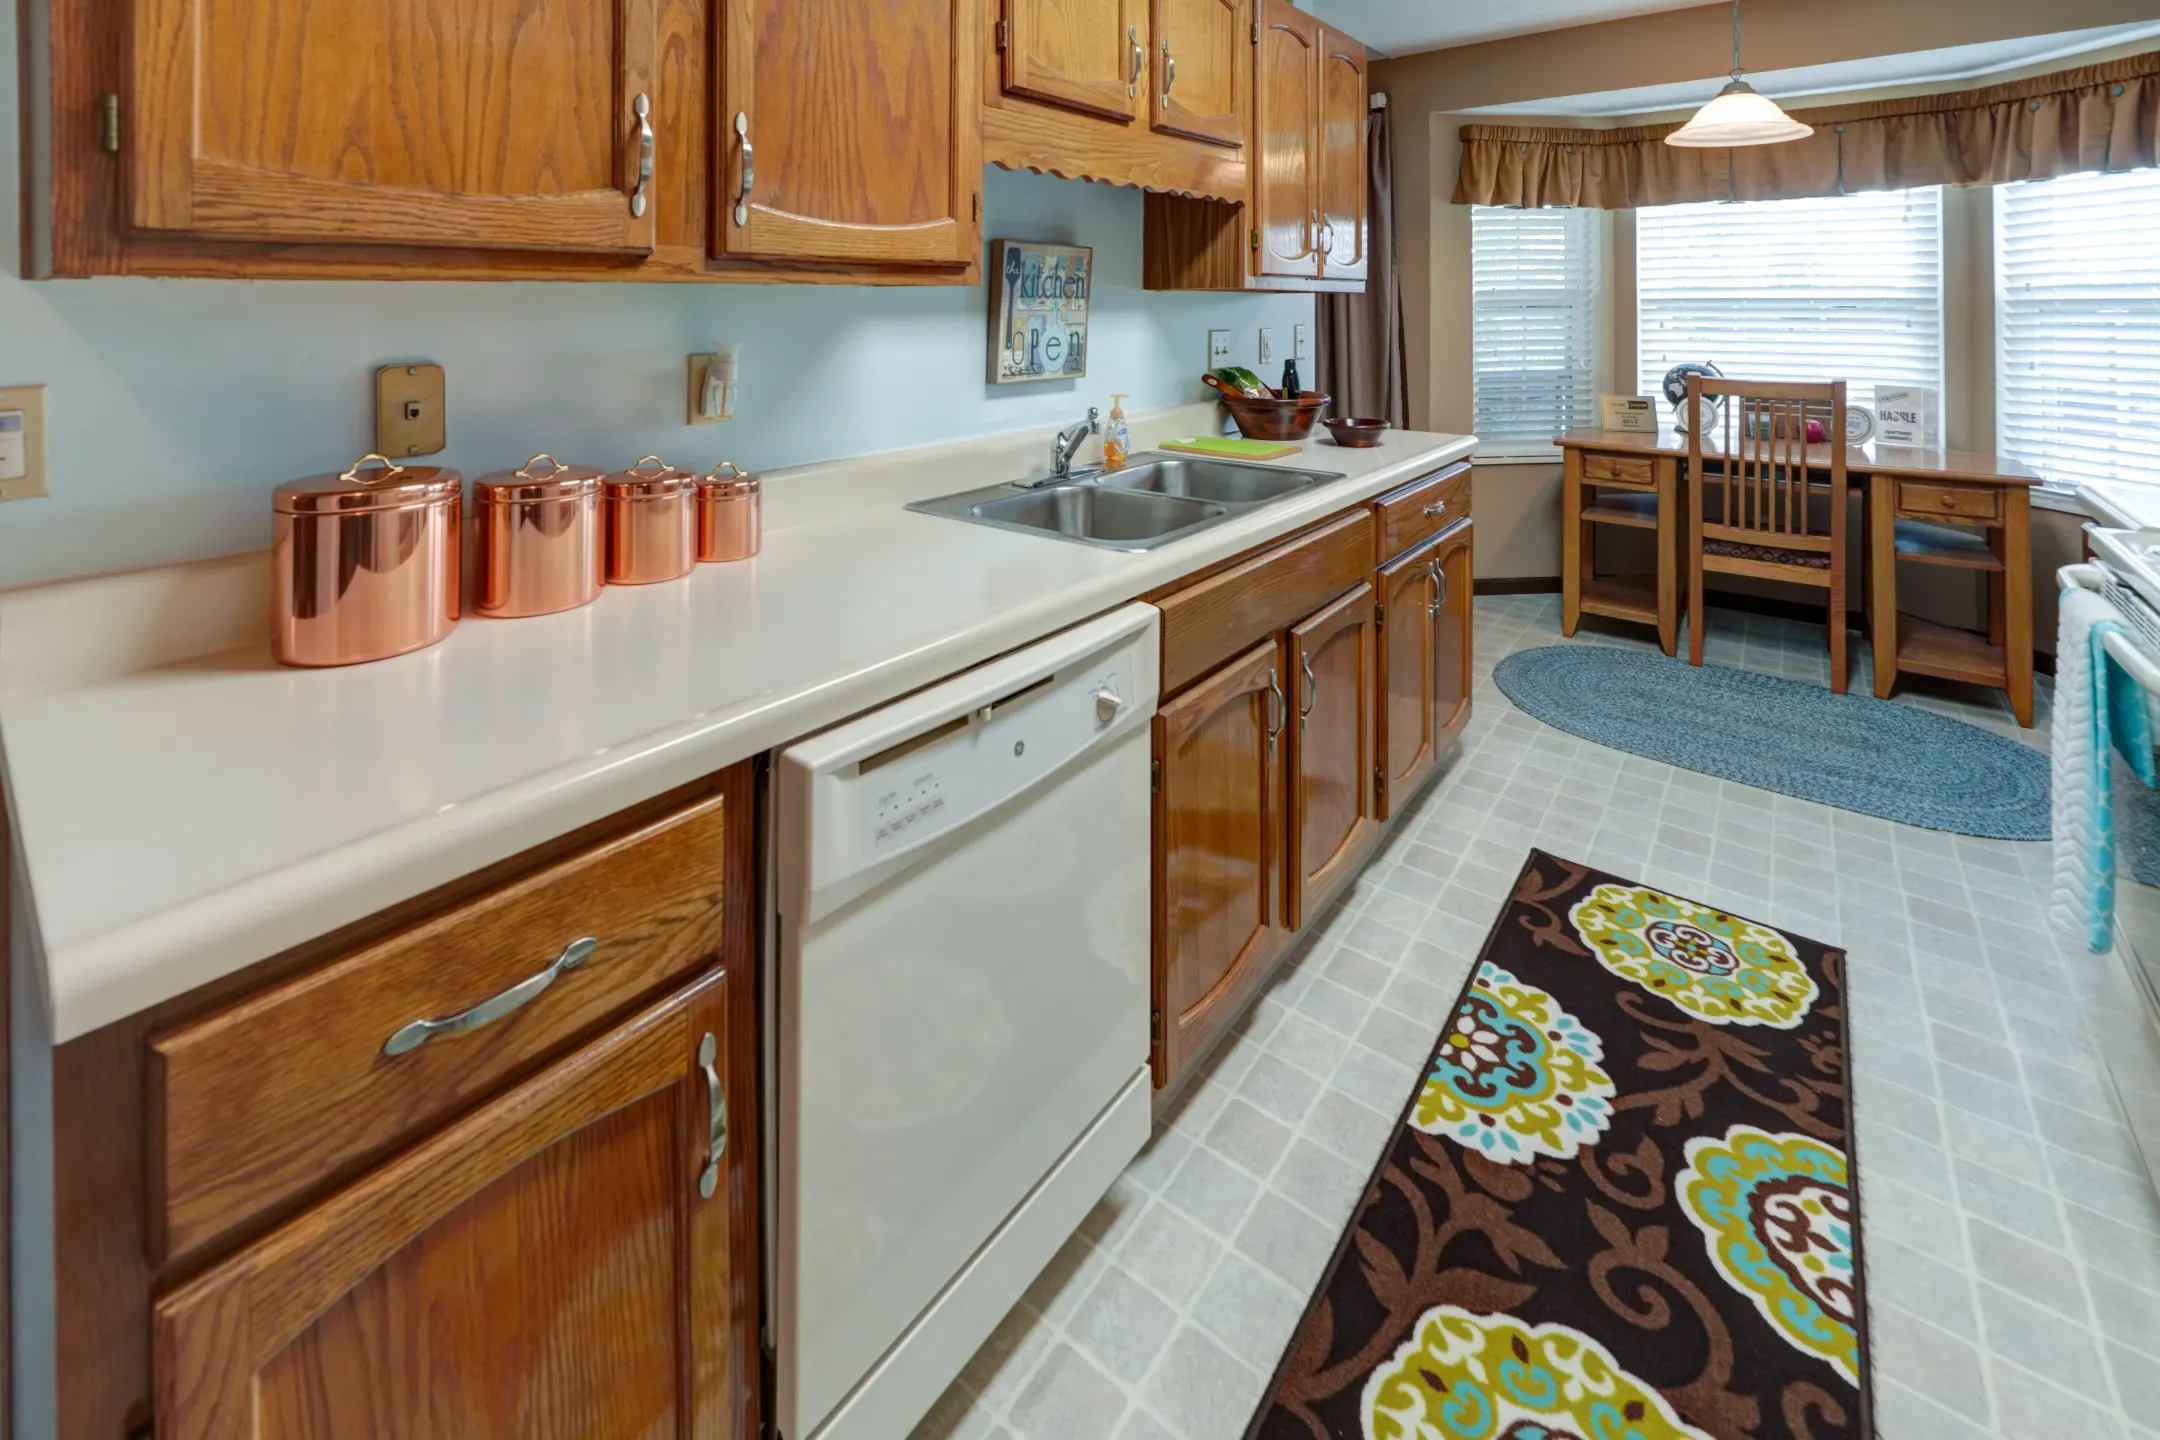 Kitchen - Sunblest Apartment Homes - Fishers, IN